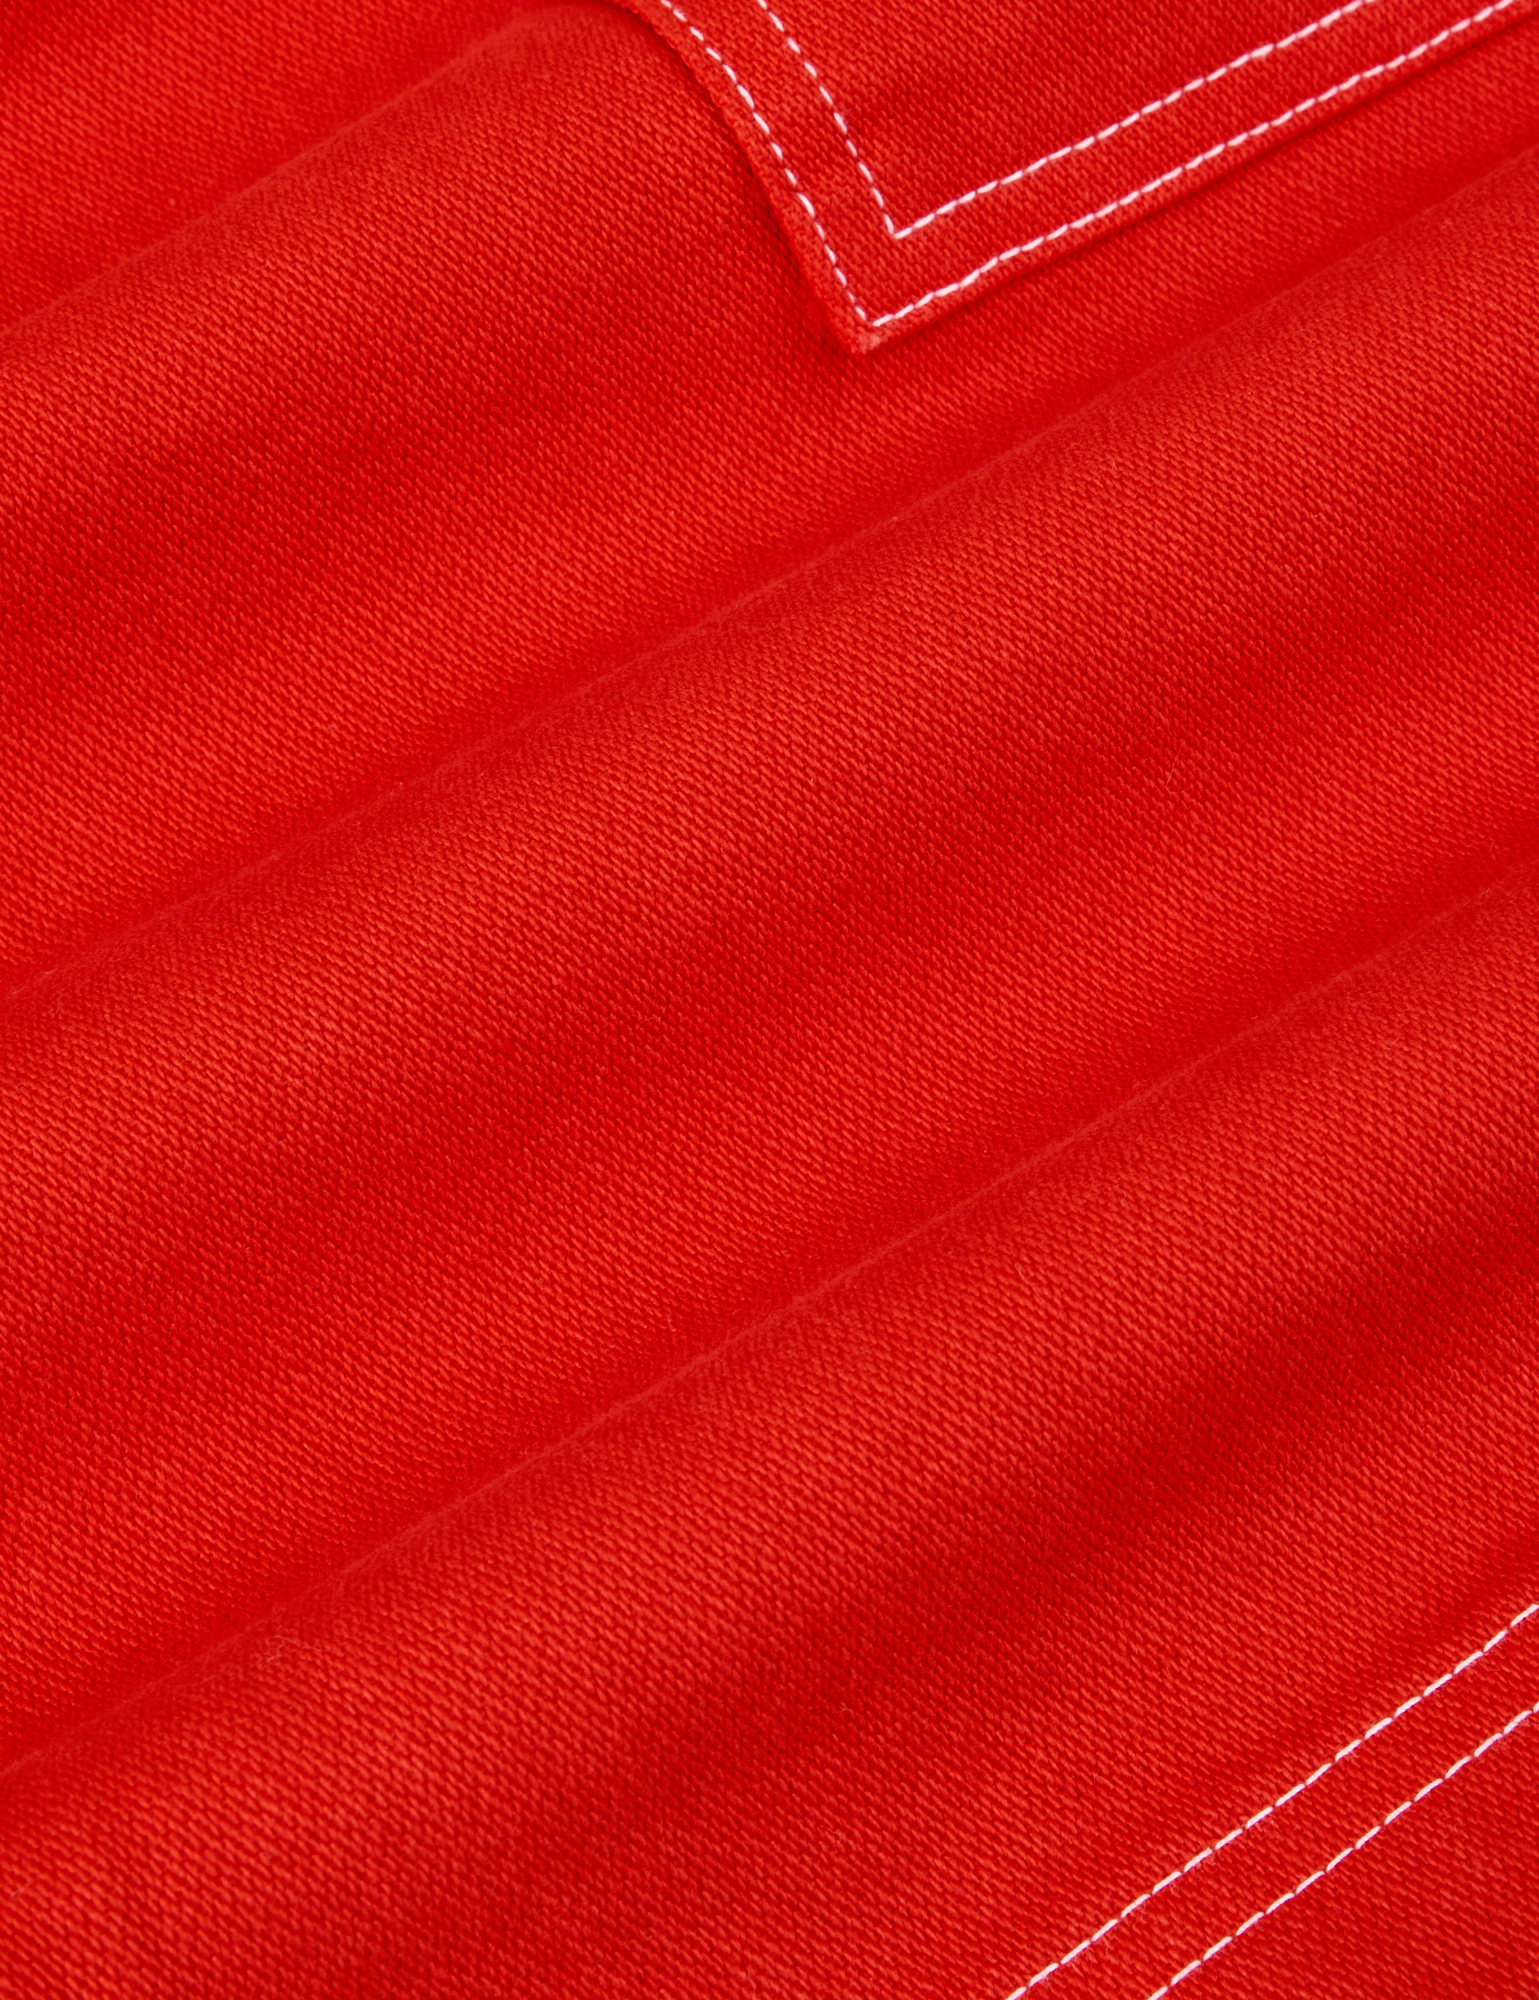 Carpenter Shorts in Mustang Red fabric detail close up